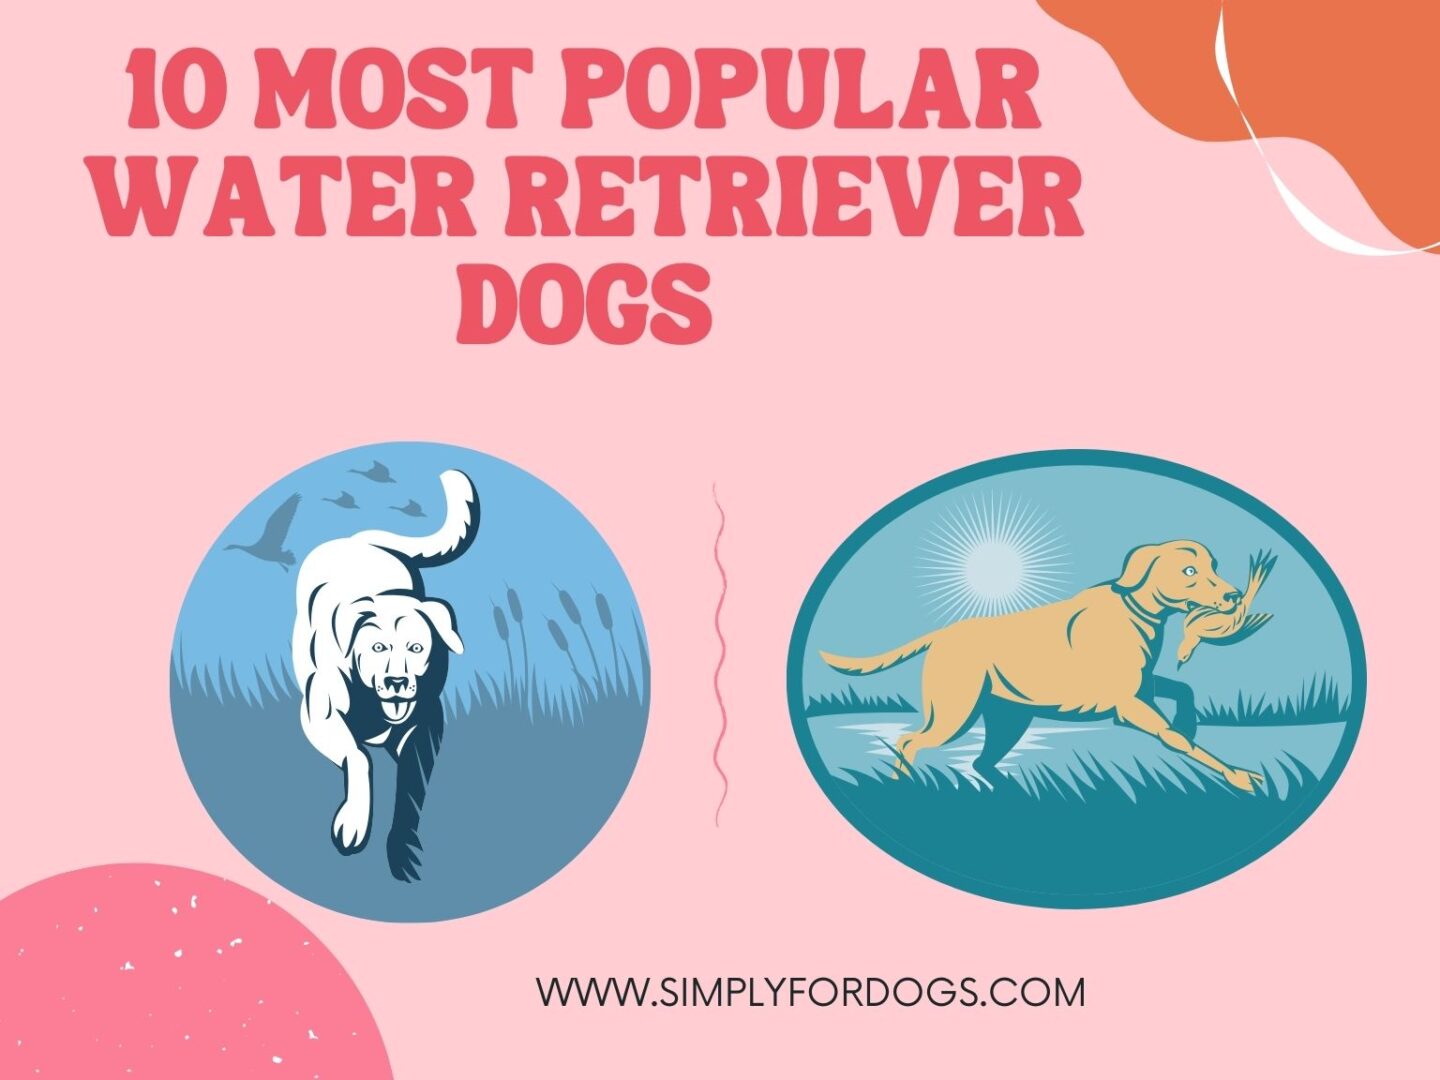 10 Most Popular Water Retriever Dogs